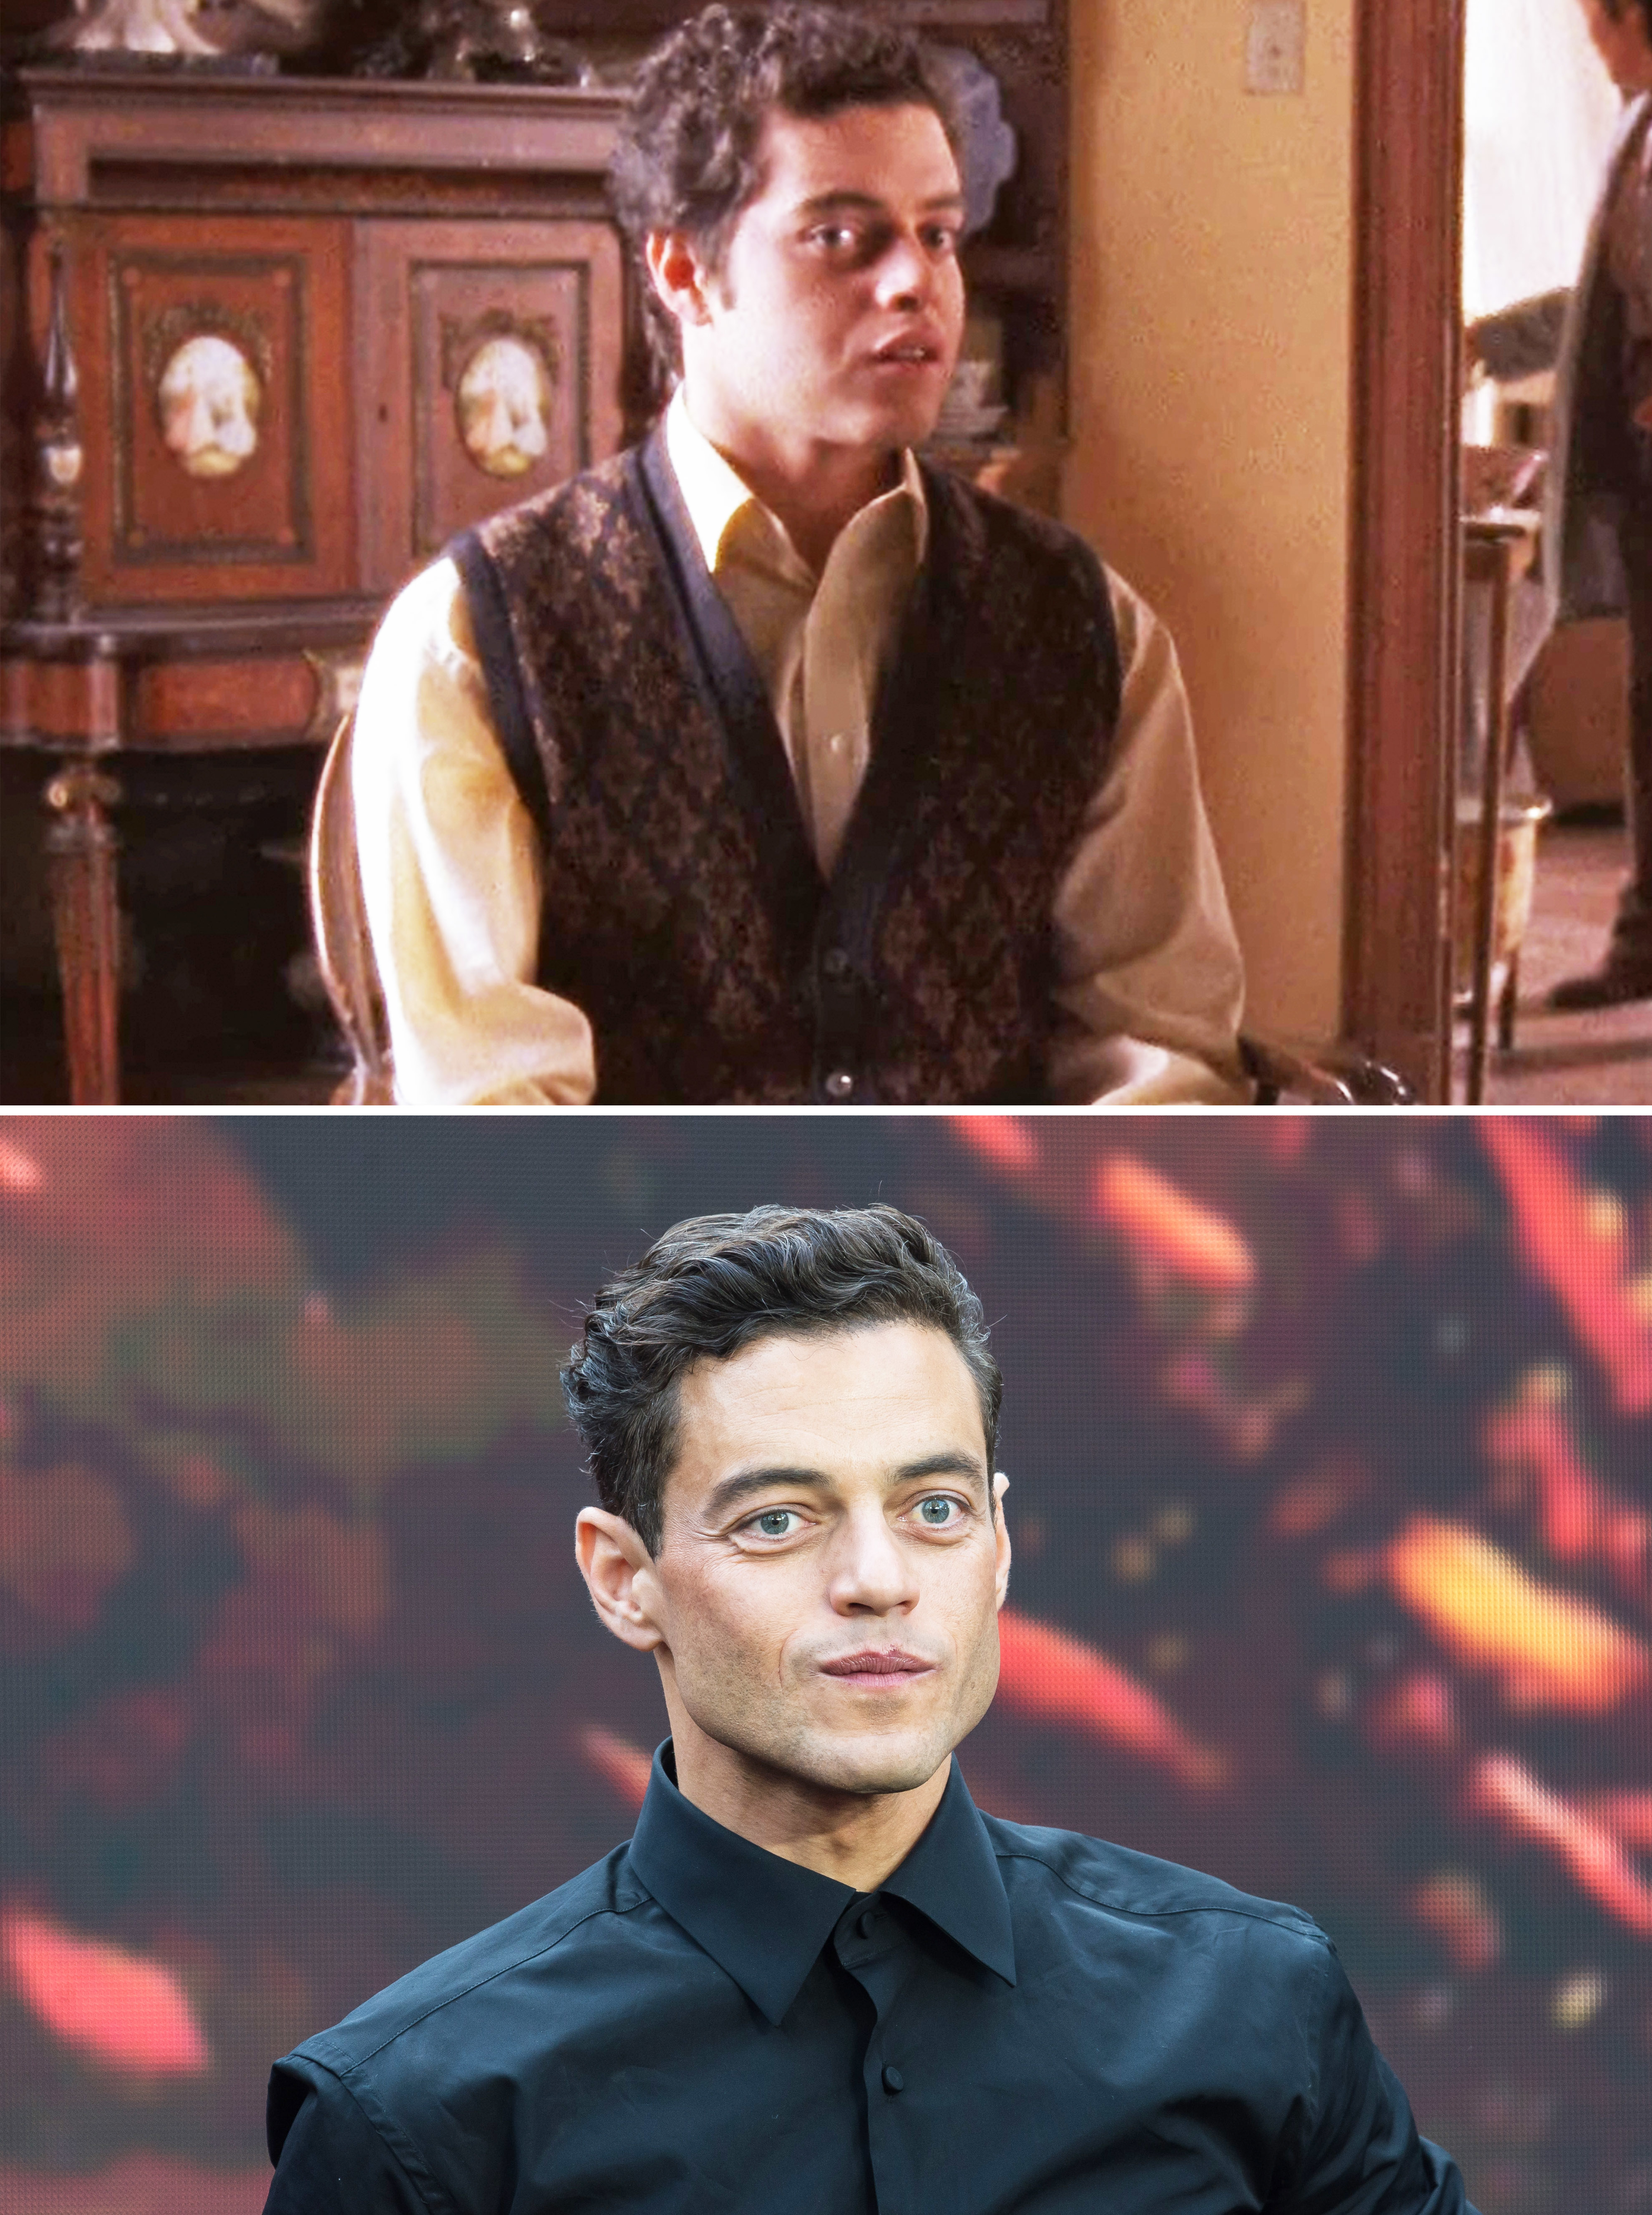 Rami in a scene from the movie and in a close-up at a media event